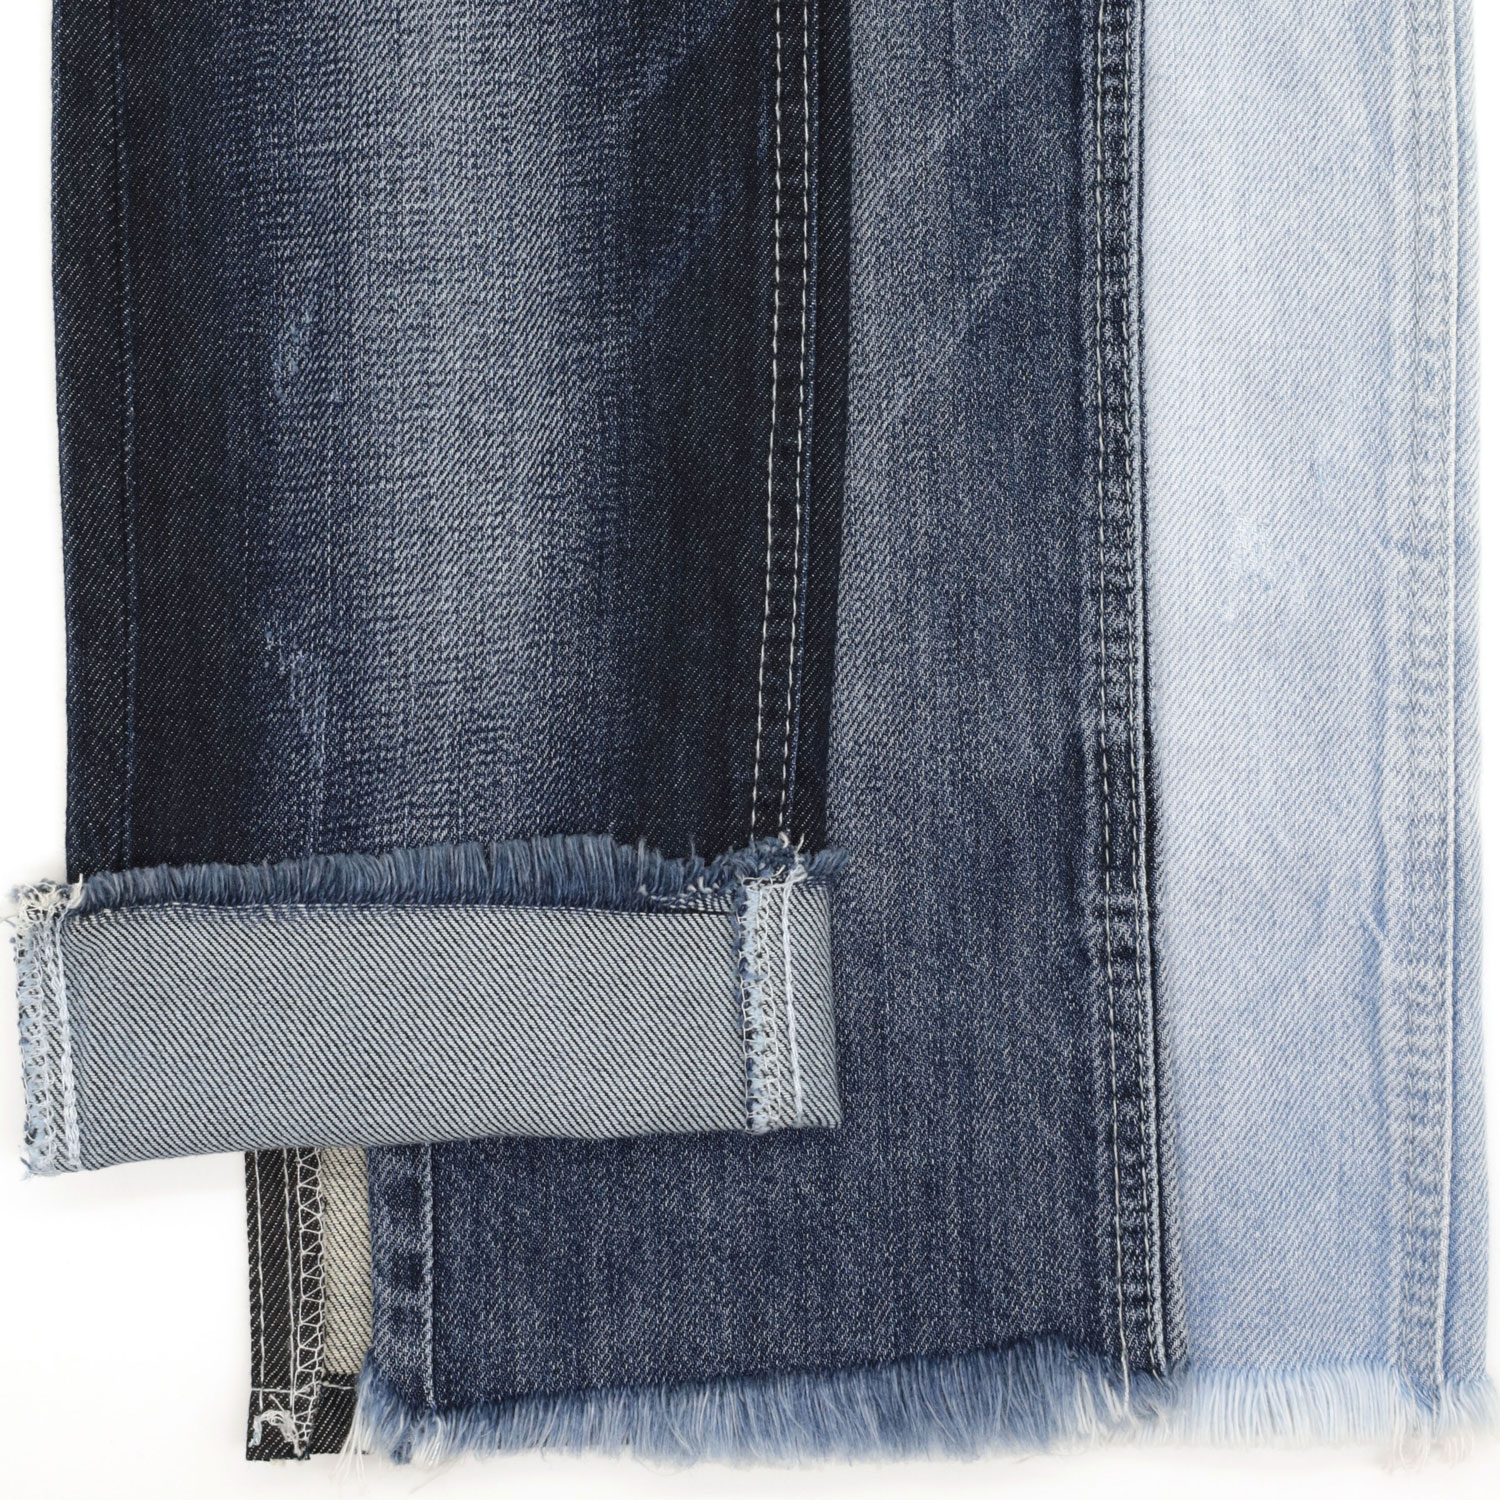 Denim Stretch Denim Fabric: What Are the Features? 2